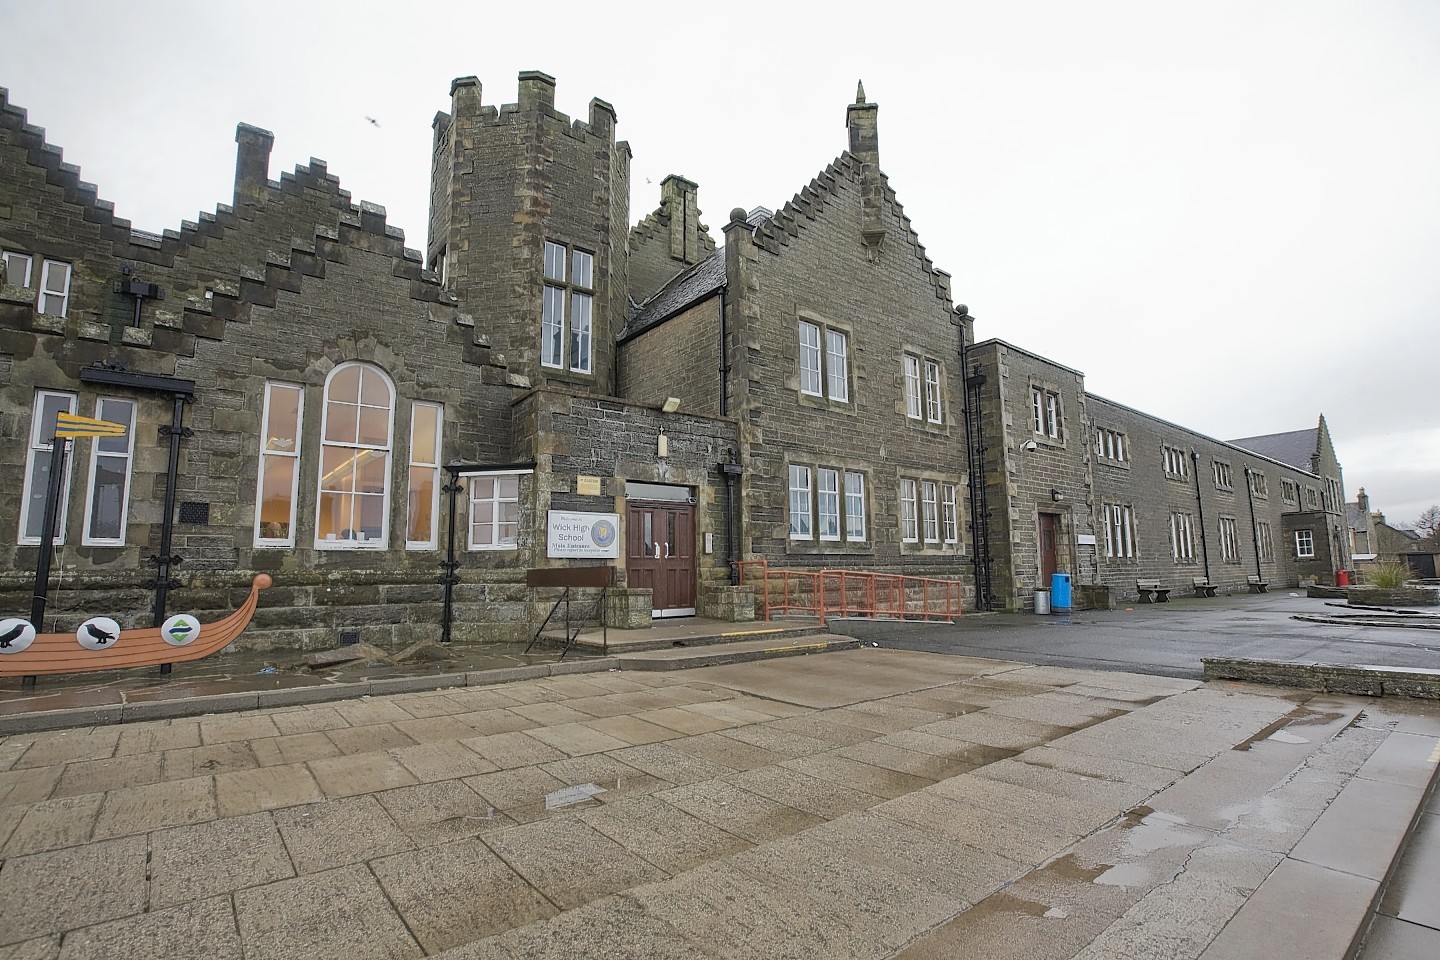 The former Wick High School building